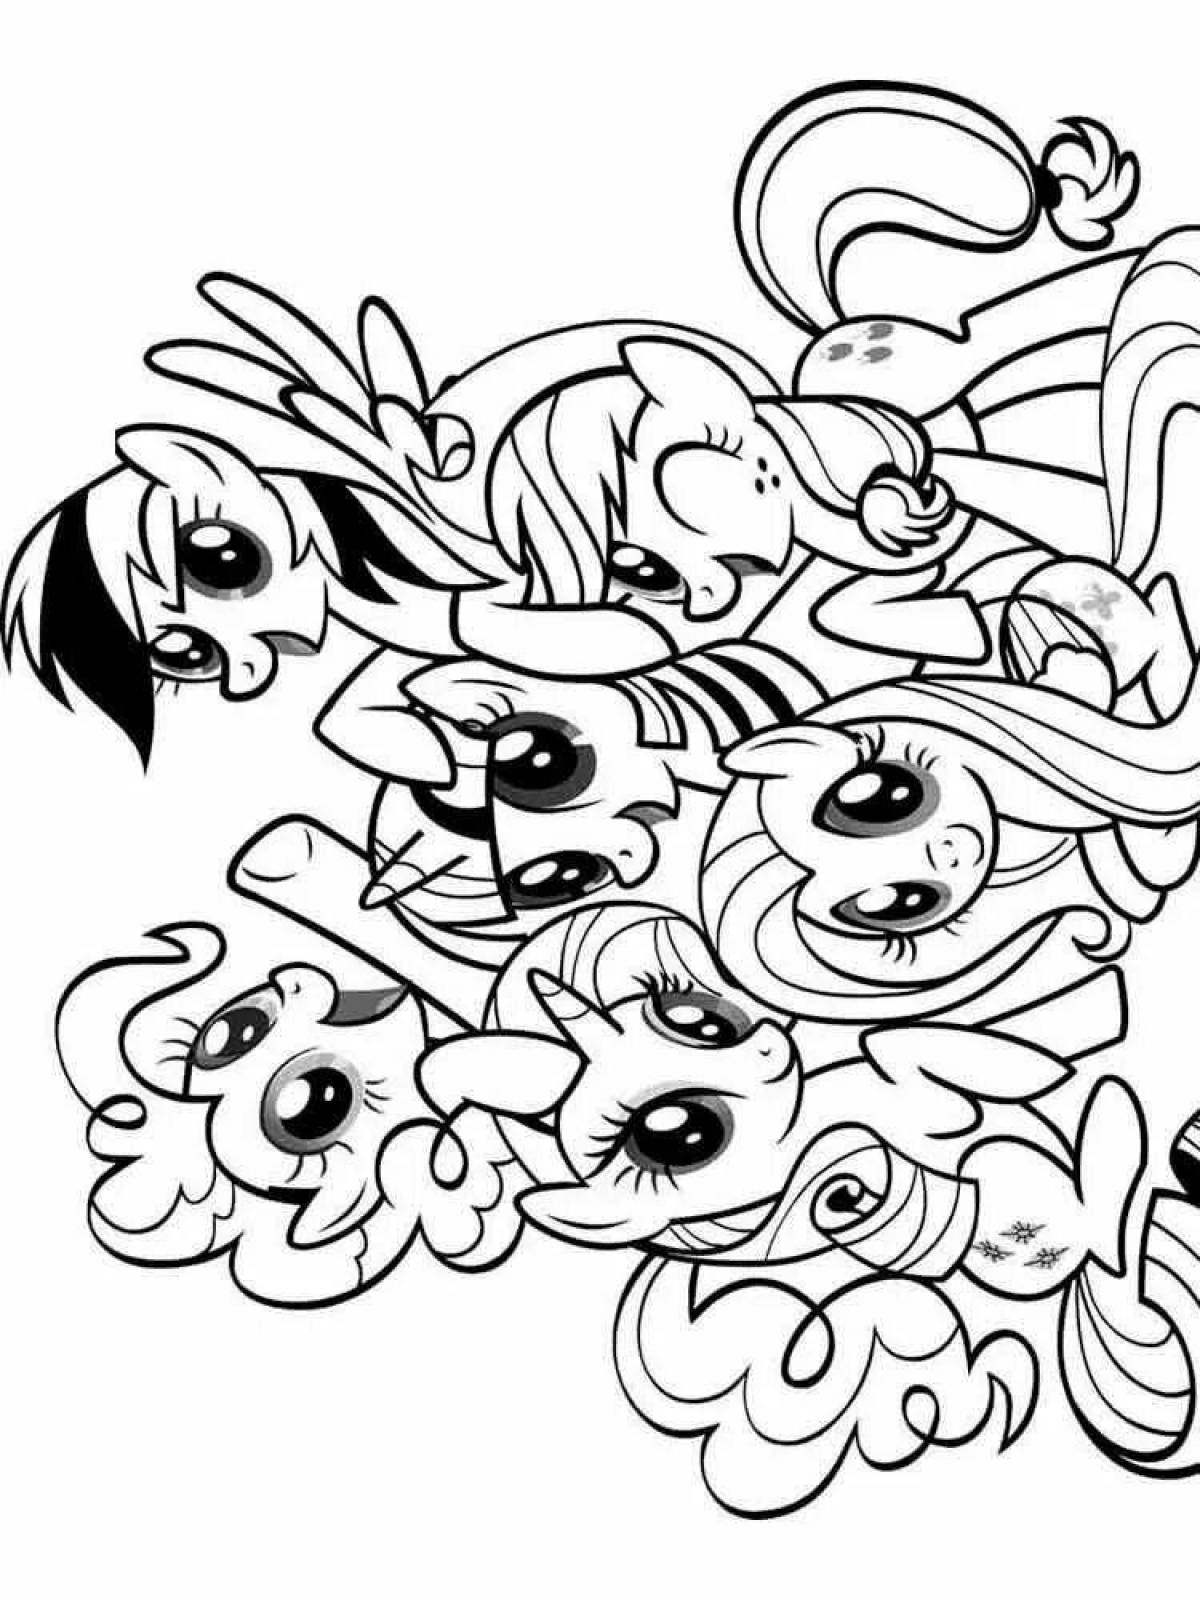 Animated pony coloring all ponies